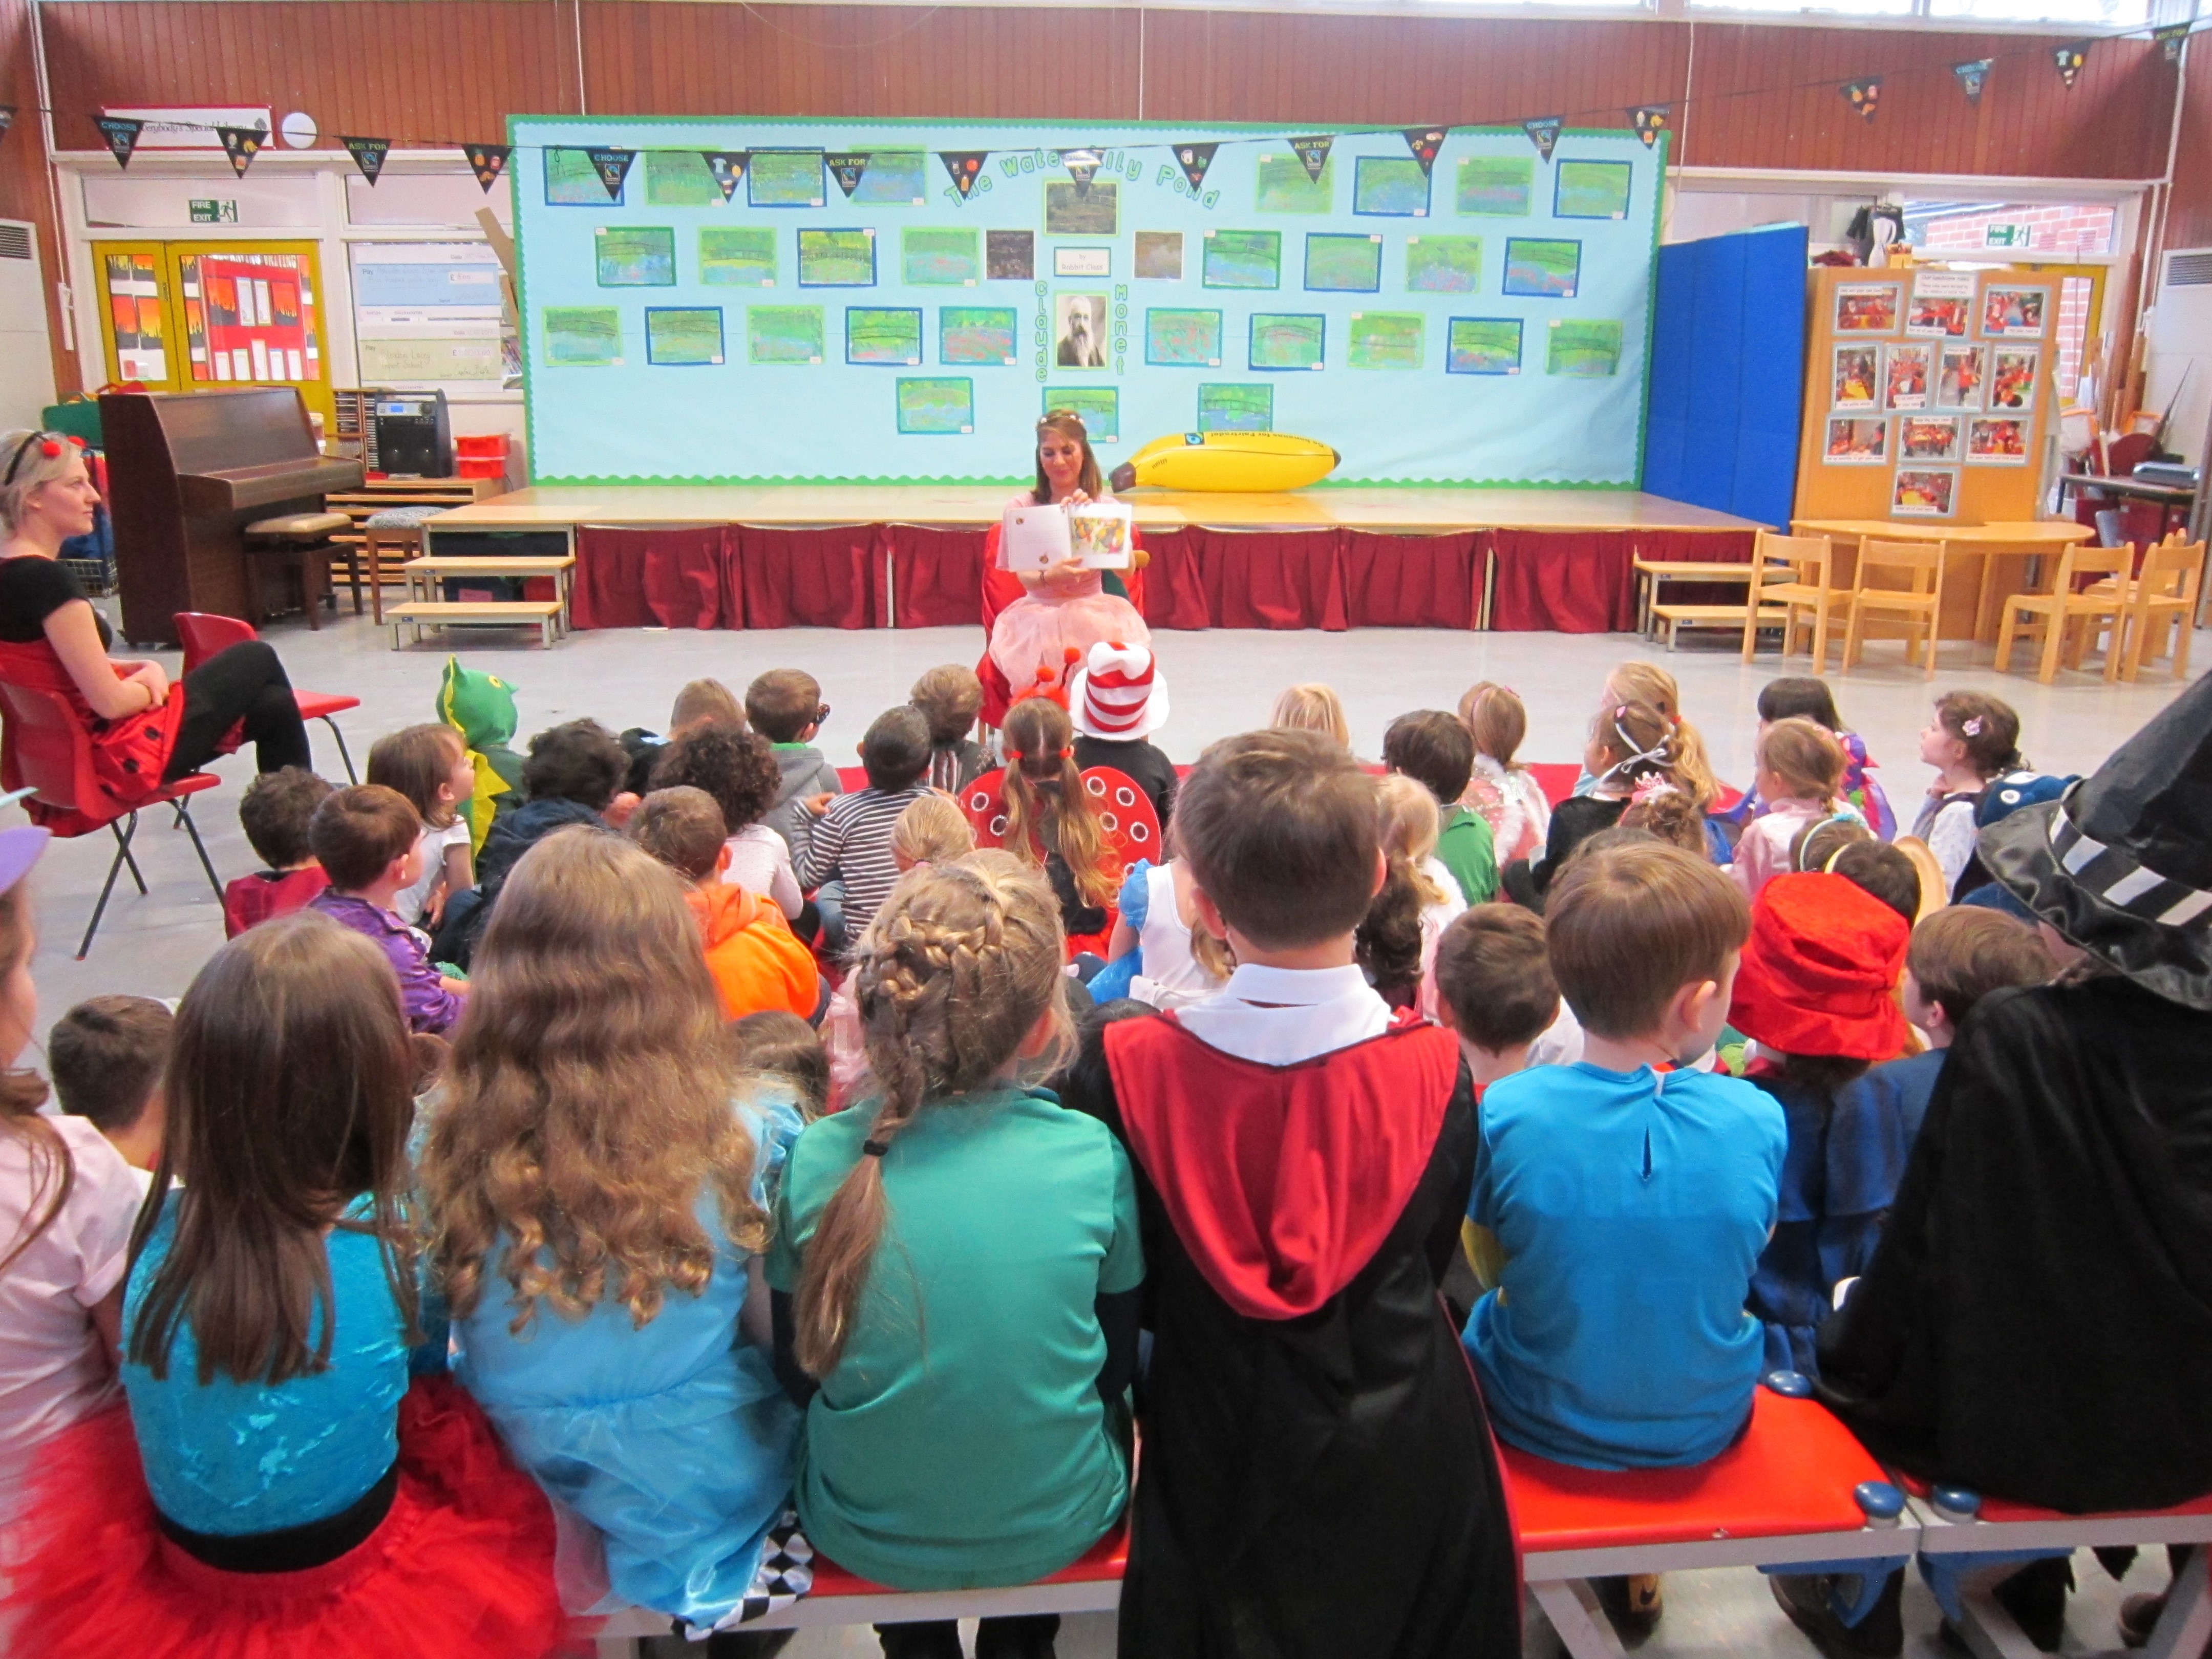 Lucy Ela Walmsley Visited a School and Read from Her Book The Faery Tales